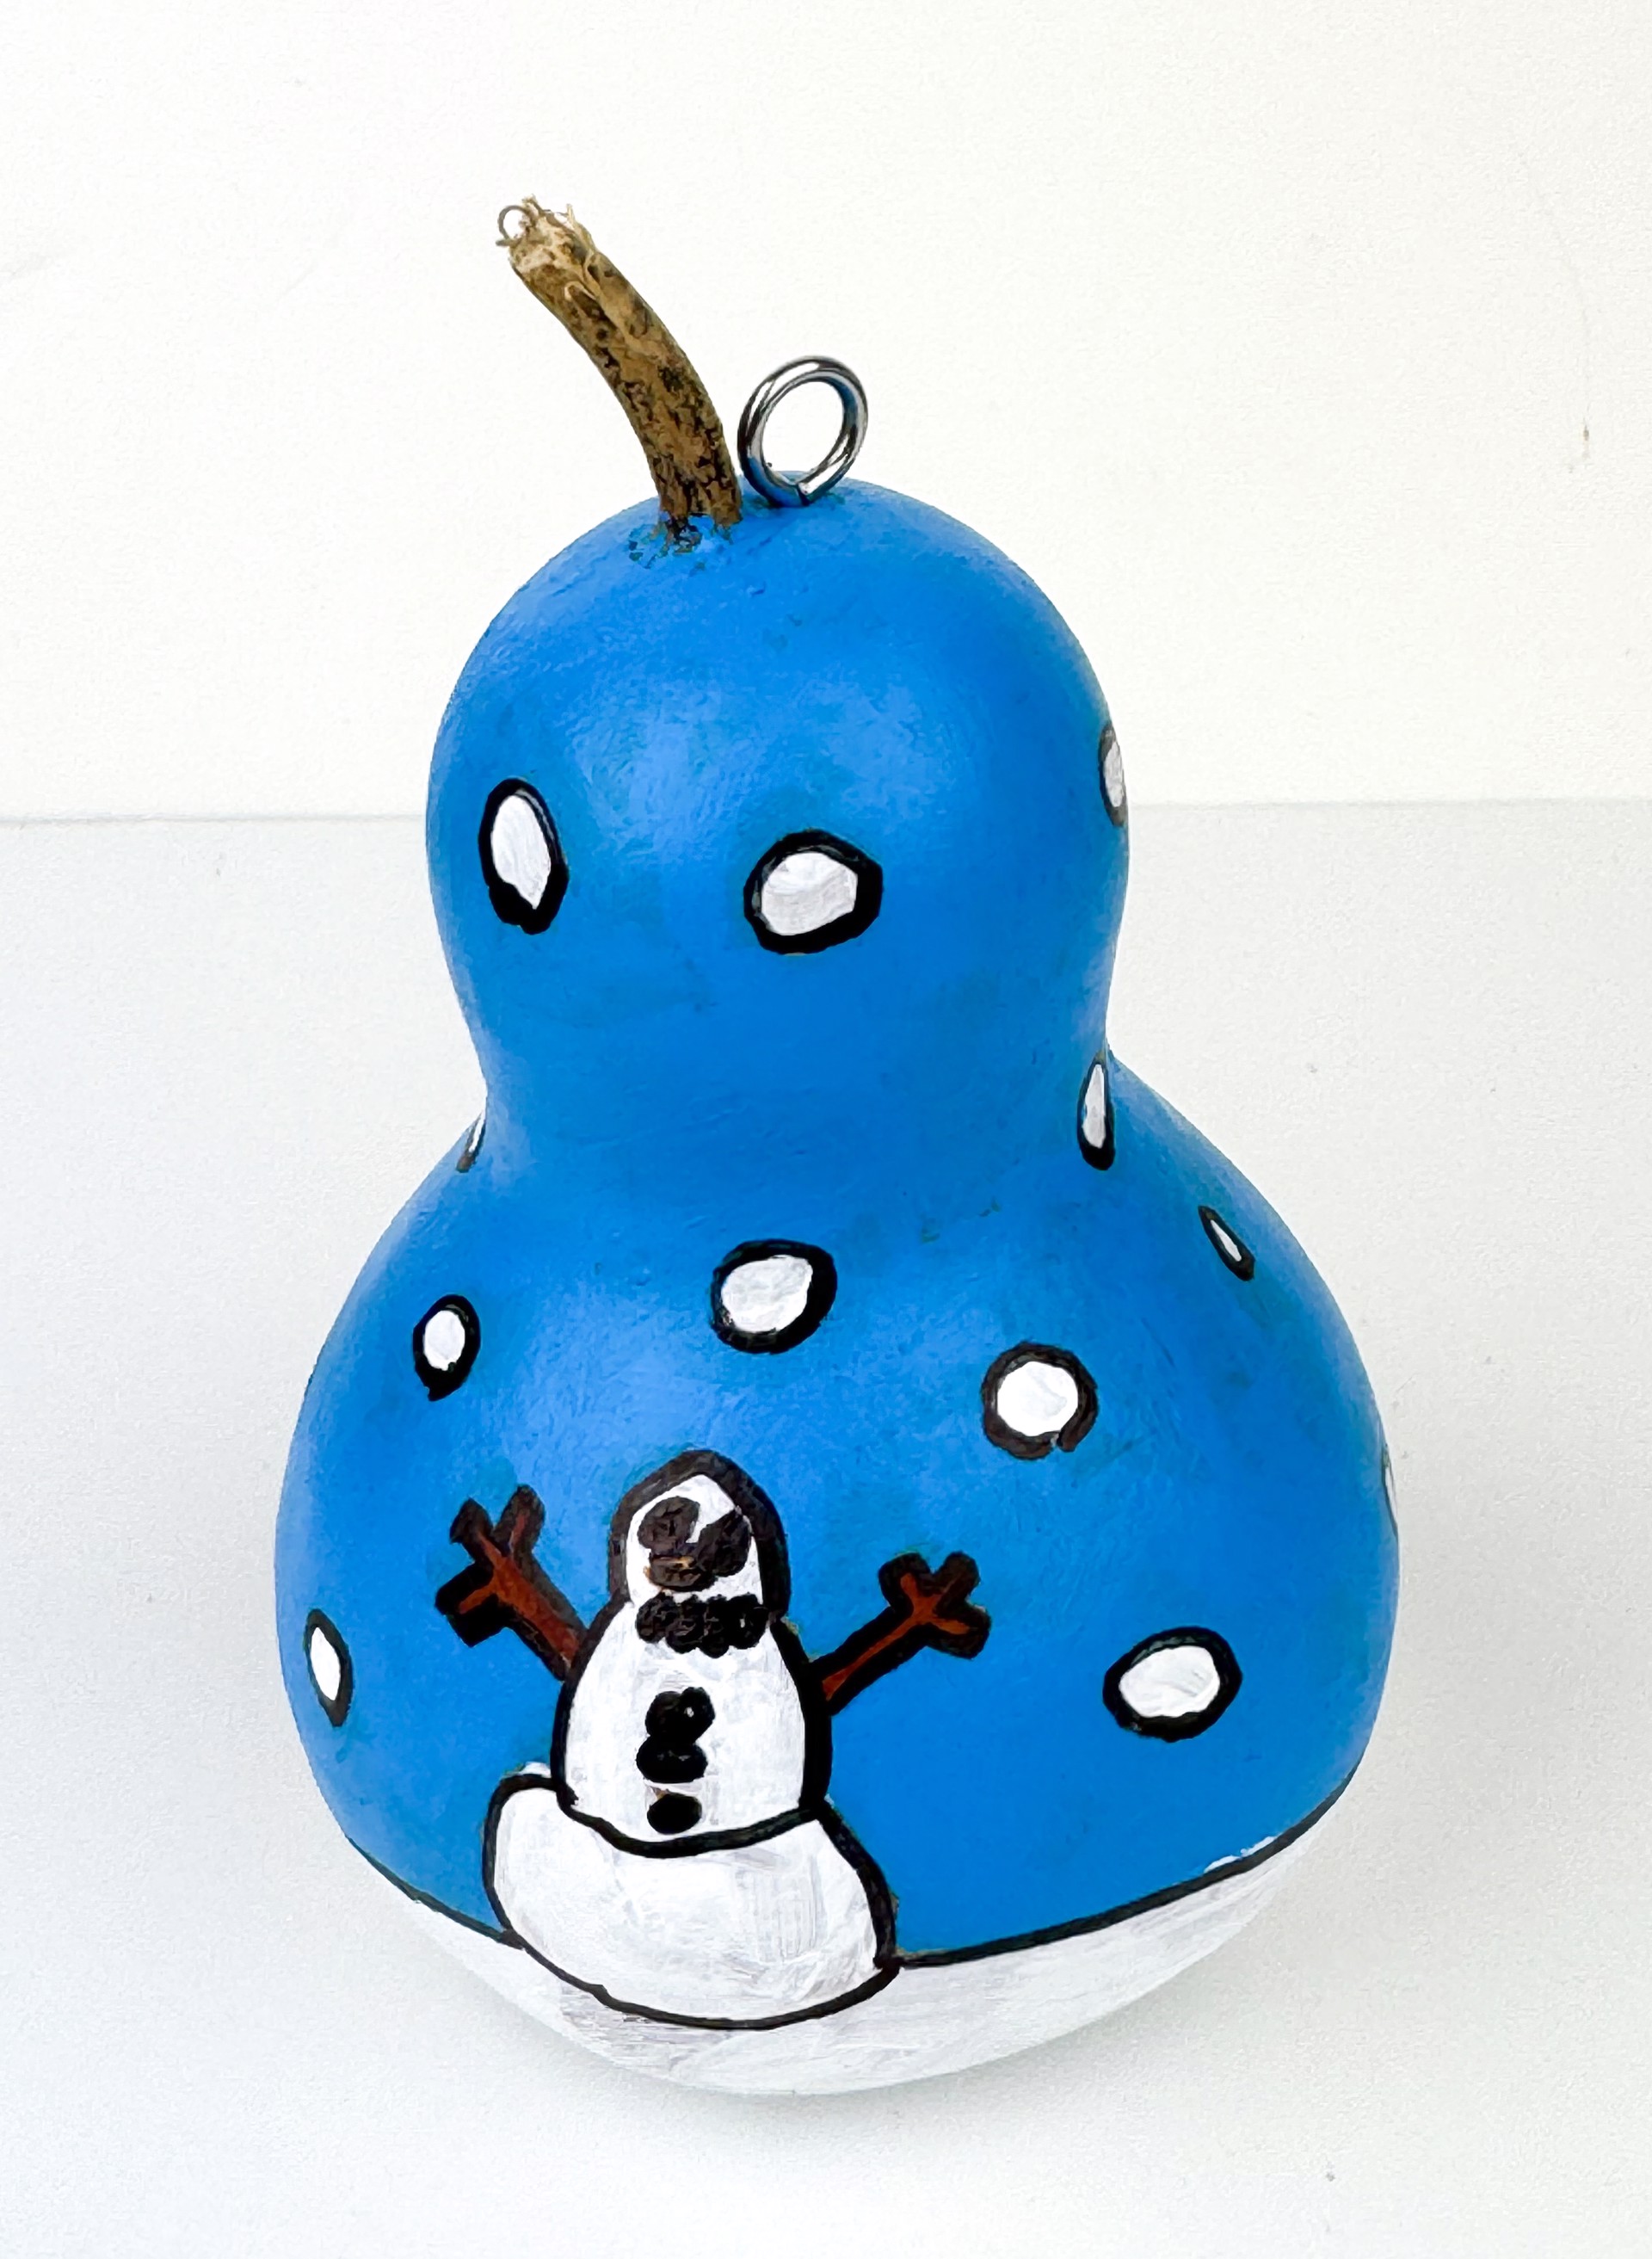 Tree and Snowman (ornament) by Gillian Patterson